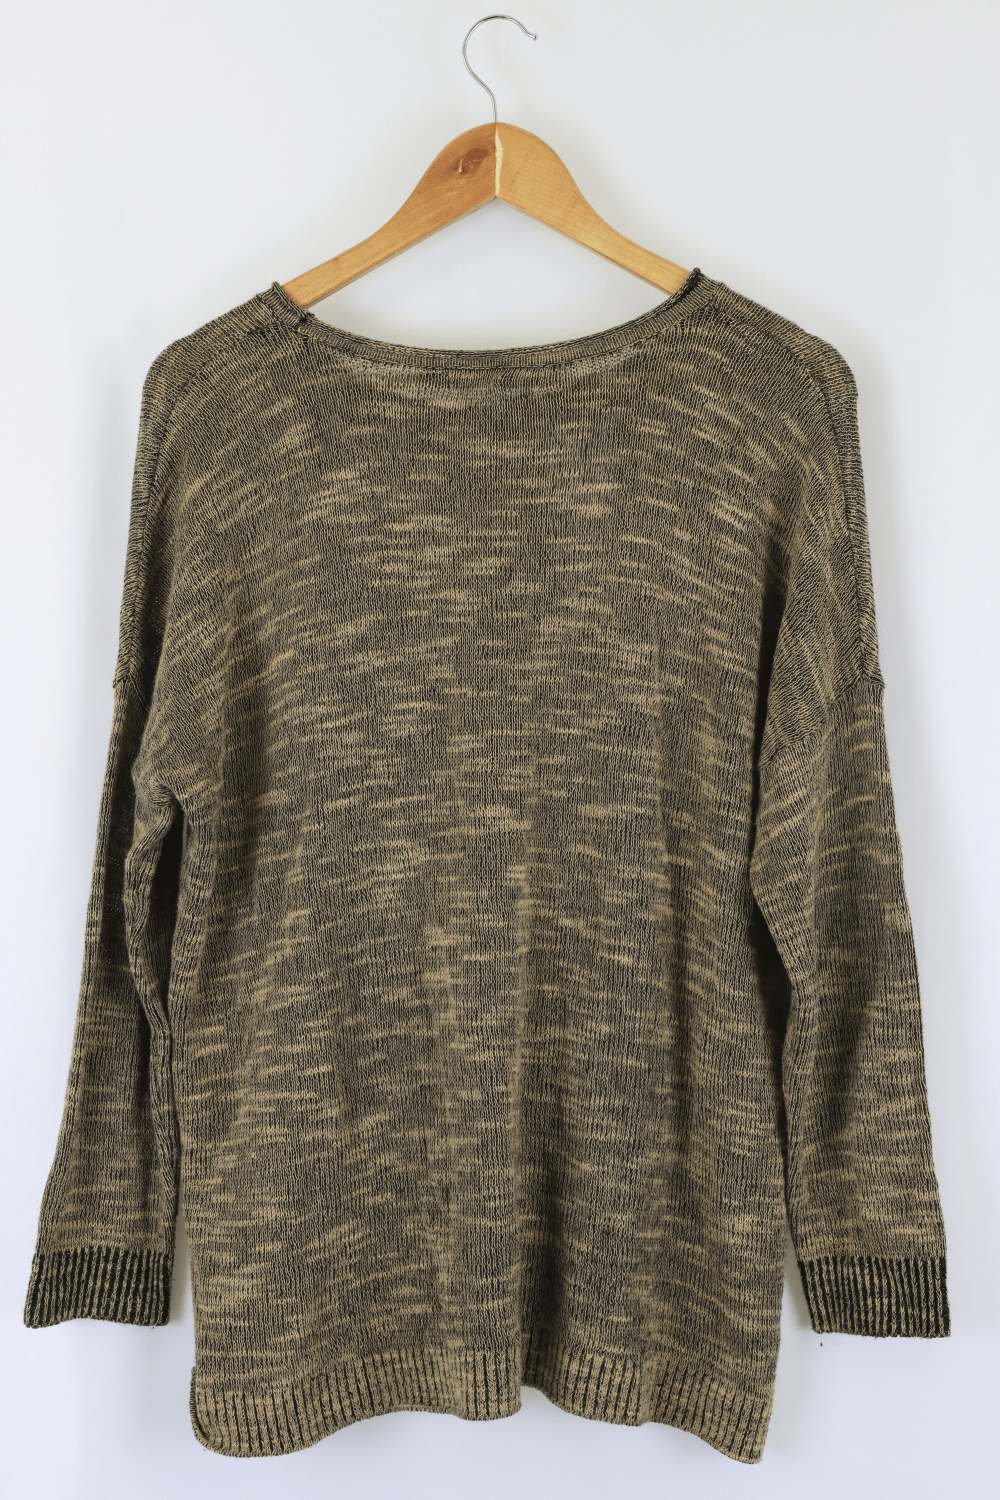 Sportsgirl Brown And Black Knitted Jumper S